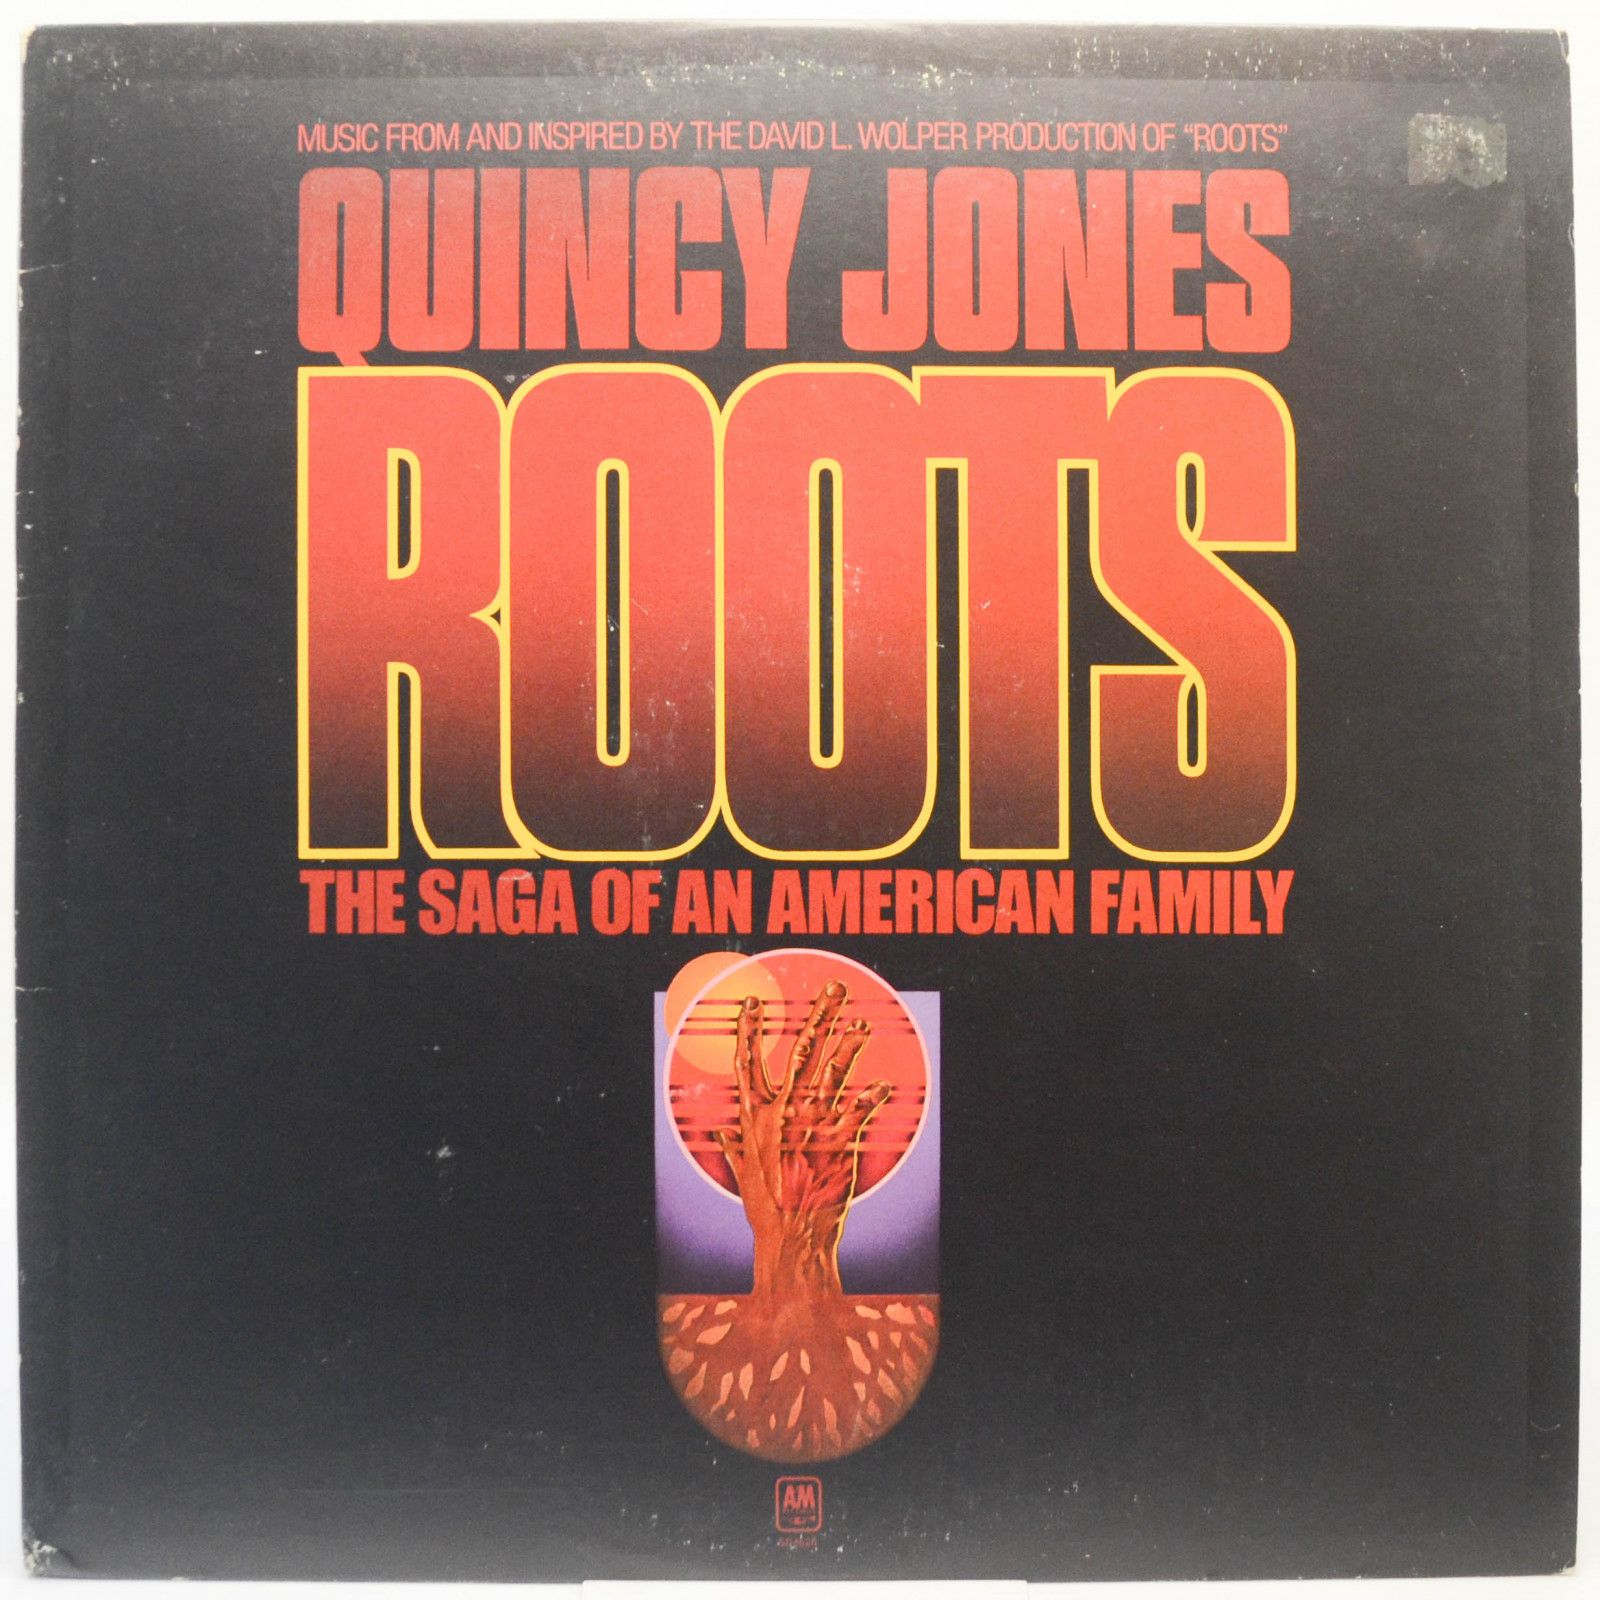 Quincy Jones — Roots (The Saga Of An American Family), 1977